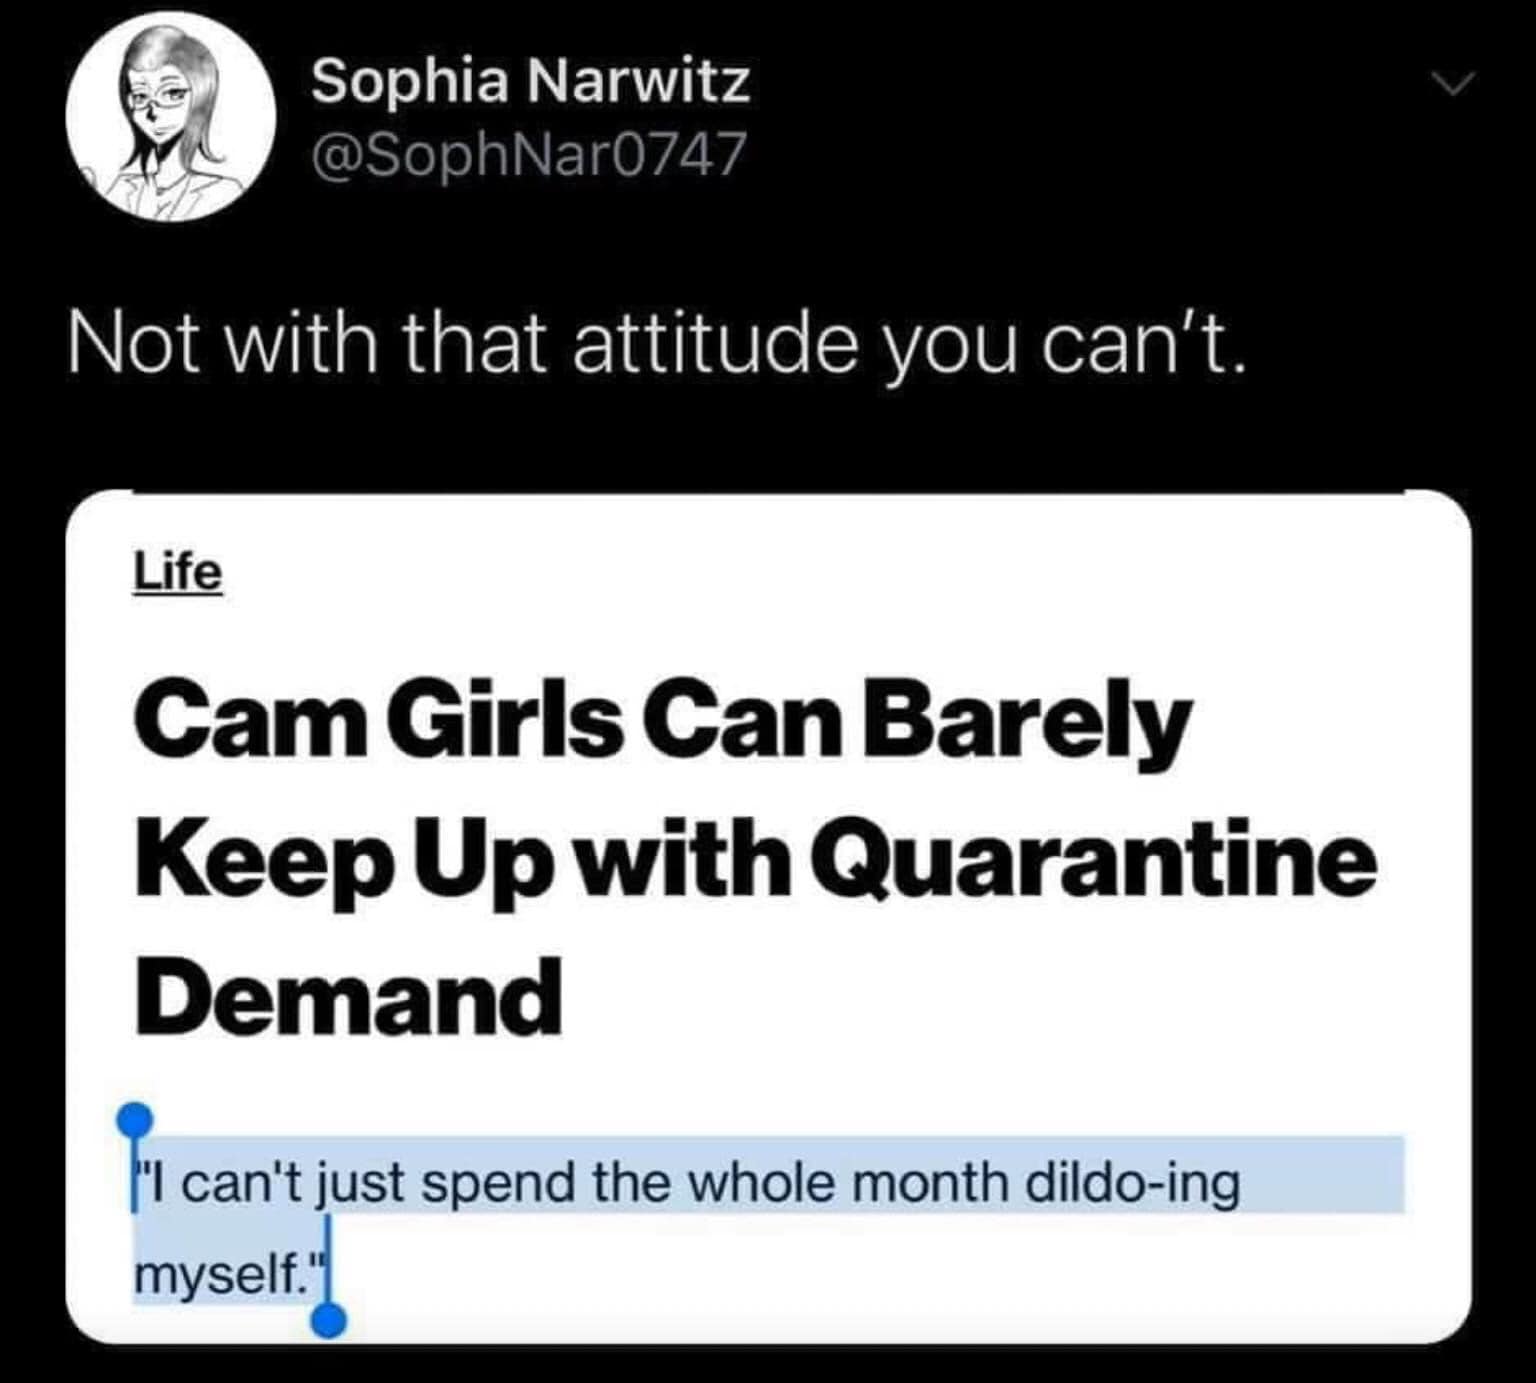 multimedia - Sophia Narwitz Not with that attitude you can't Life Cam Girls Can Barely Keep Up with Quarantine Demand 'I can't just spend the whole month dildoing myself."